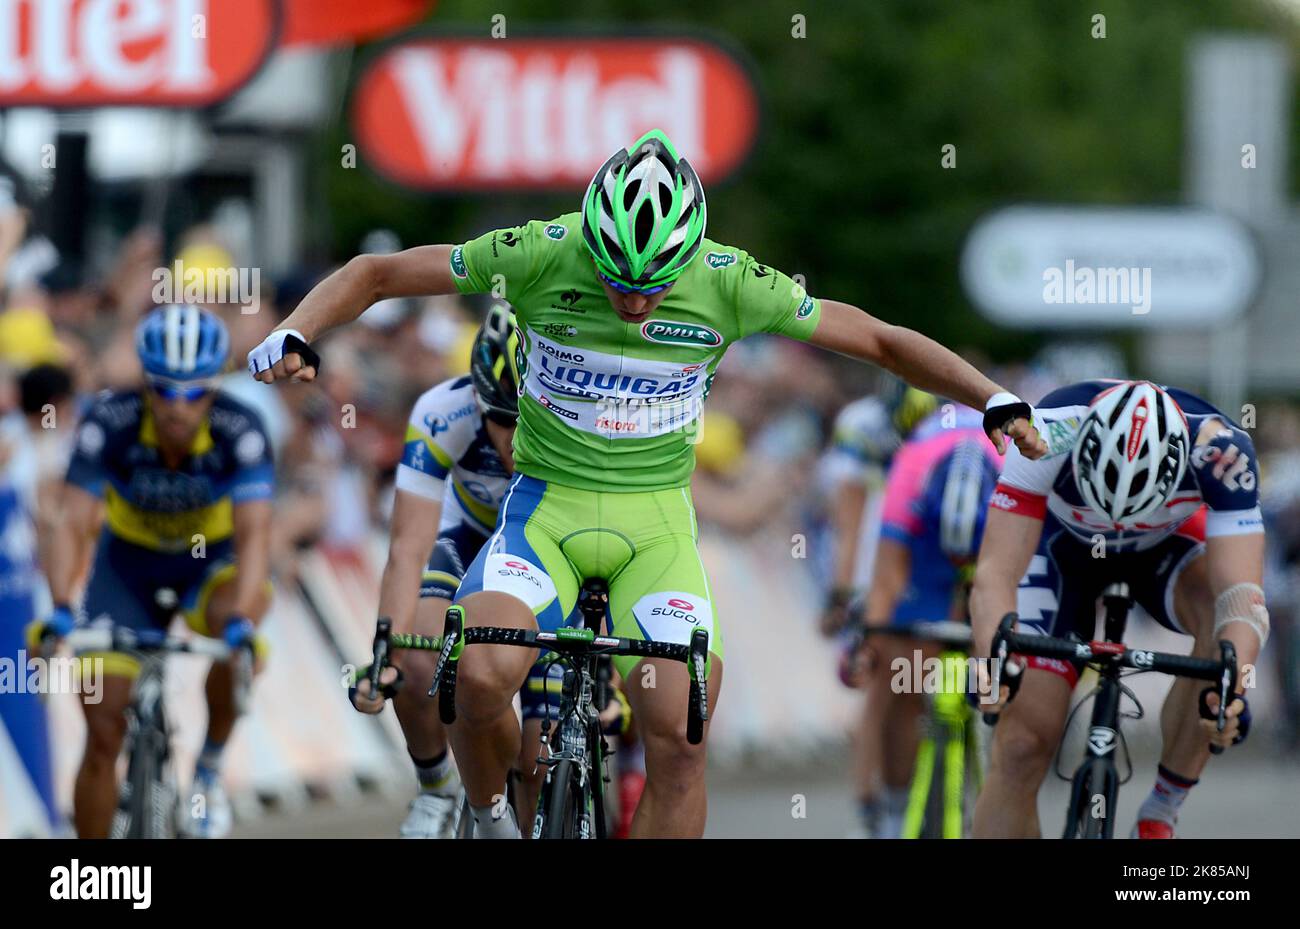 Peter Sagan takes the stage win ahead of AndrŽ Greipel and Matthew Goss and Kenny Rober Van Hummel during Stage 6 of the 2012 Tour de France  Stock Photo